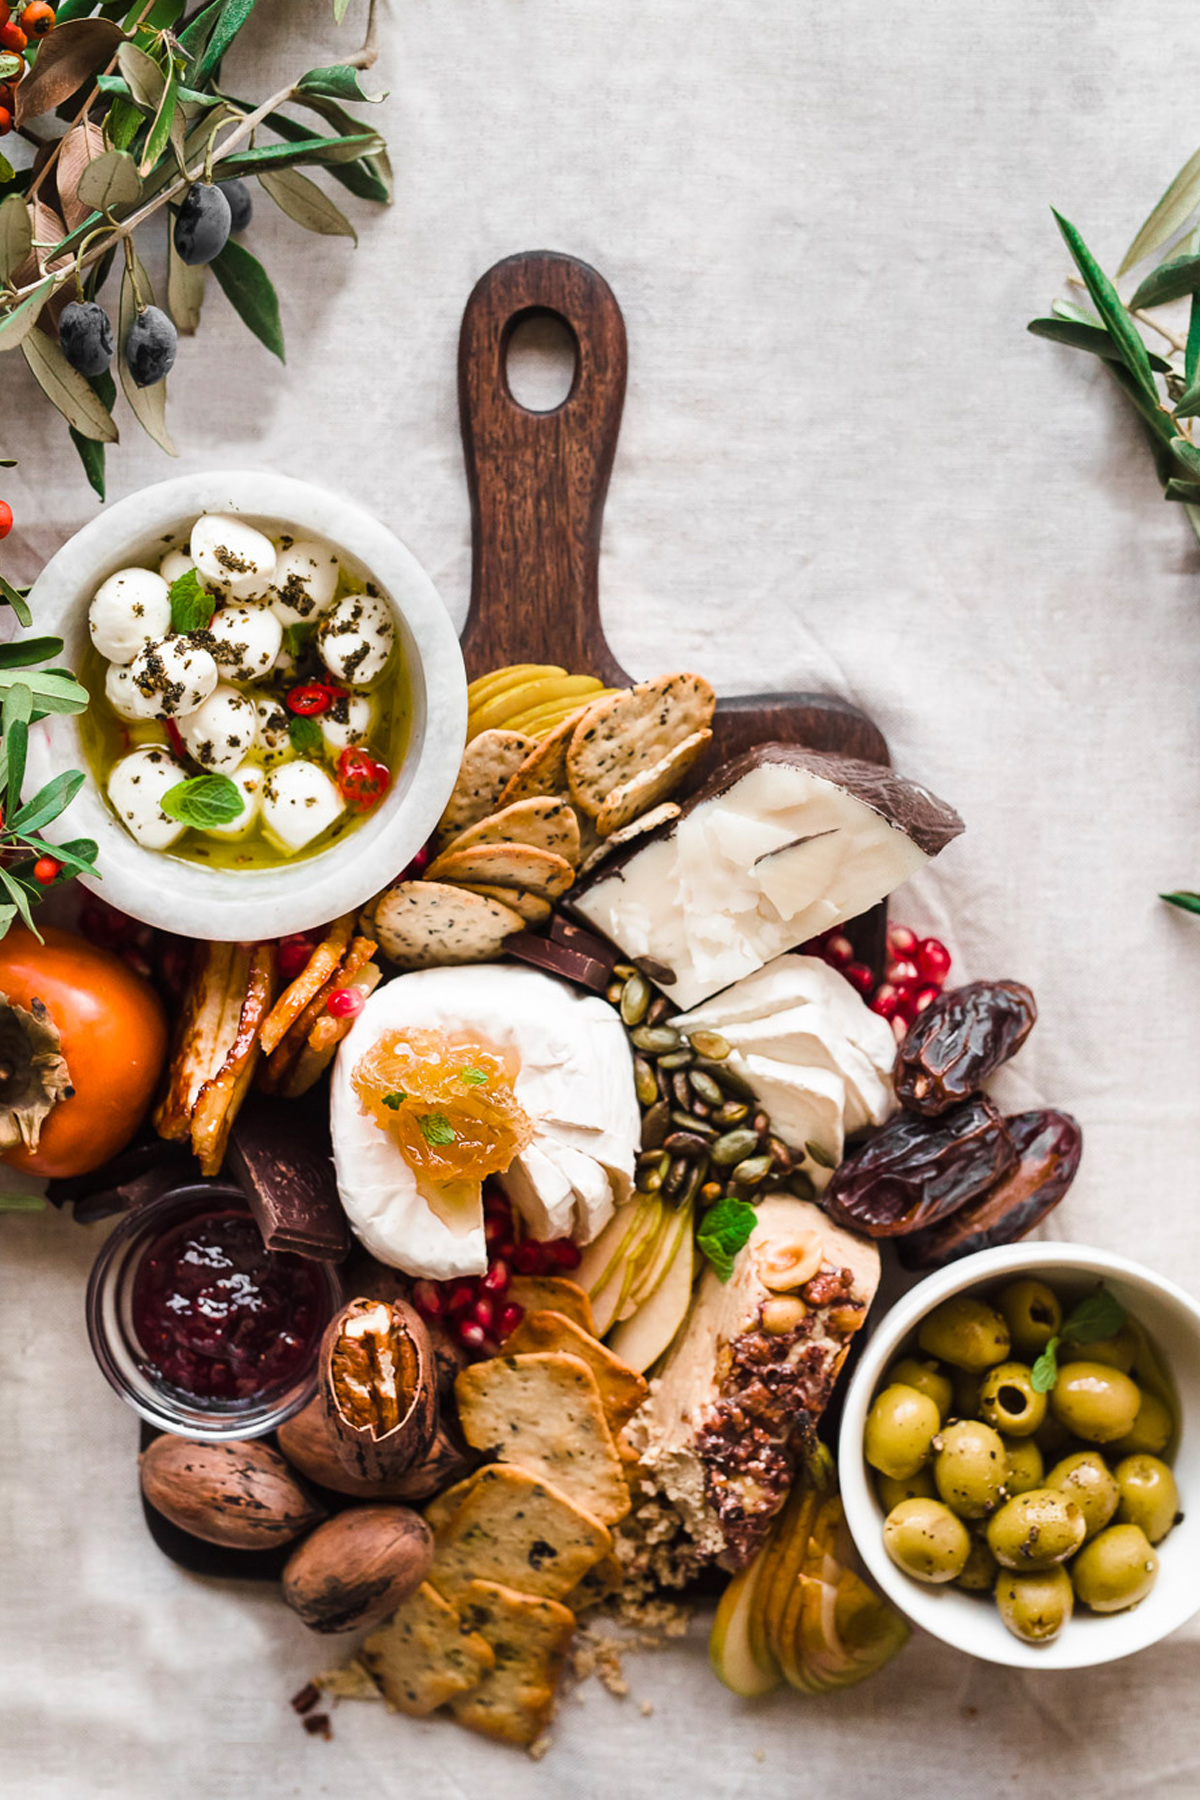 Gather A Table's holiday board includes seasonal fruit, chocolate, olives, cheese, and crackers.